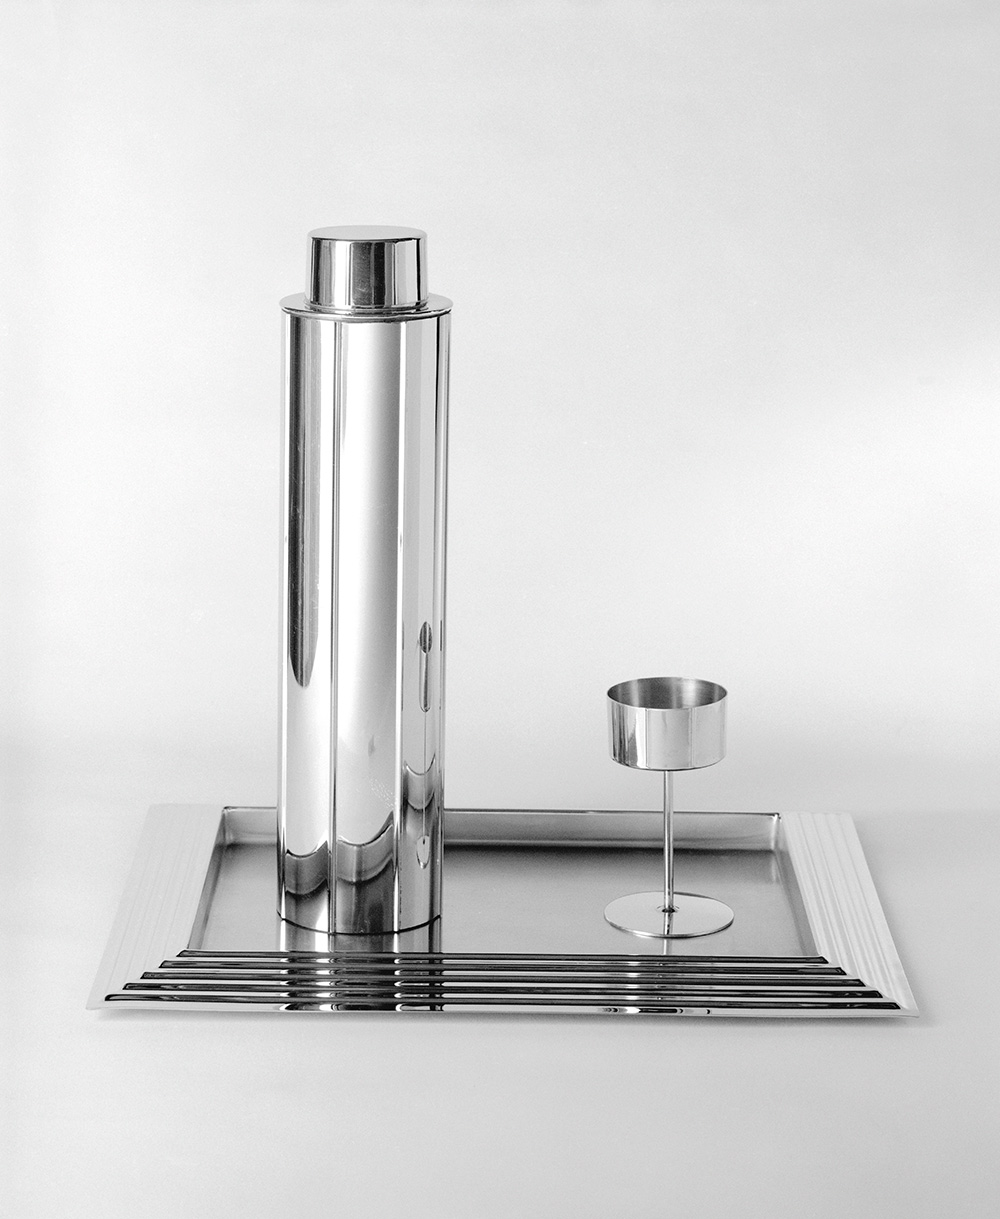 Norman Bel Geddes, "Skyscraper" cocktail shaker, eight glasses, and serving tray, designed 1934, manufactured 1935. chrome-plated metal, 12 3/4 x 3 1/4 x 3 1/4 in. (32.4 x 8.4 x 8.4 cm). Brooklyn Museum, Gift of Paul F. Walker, 83.108.5a-c